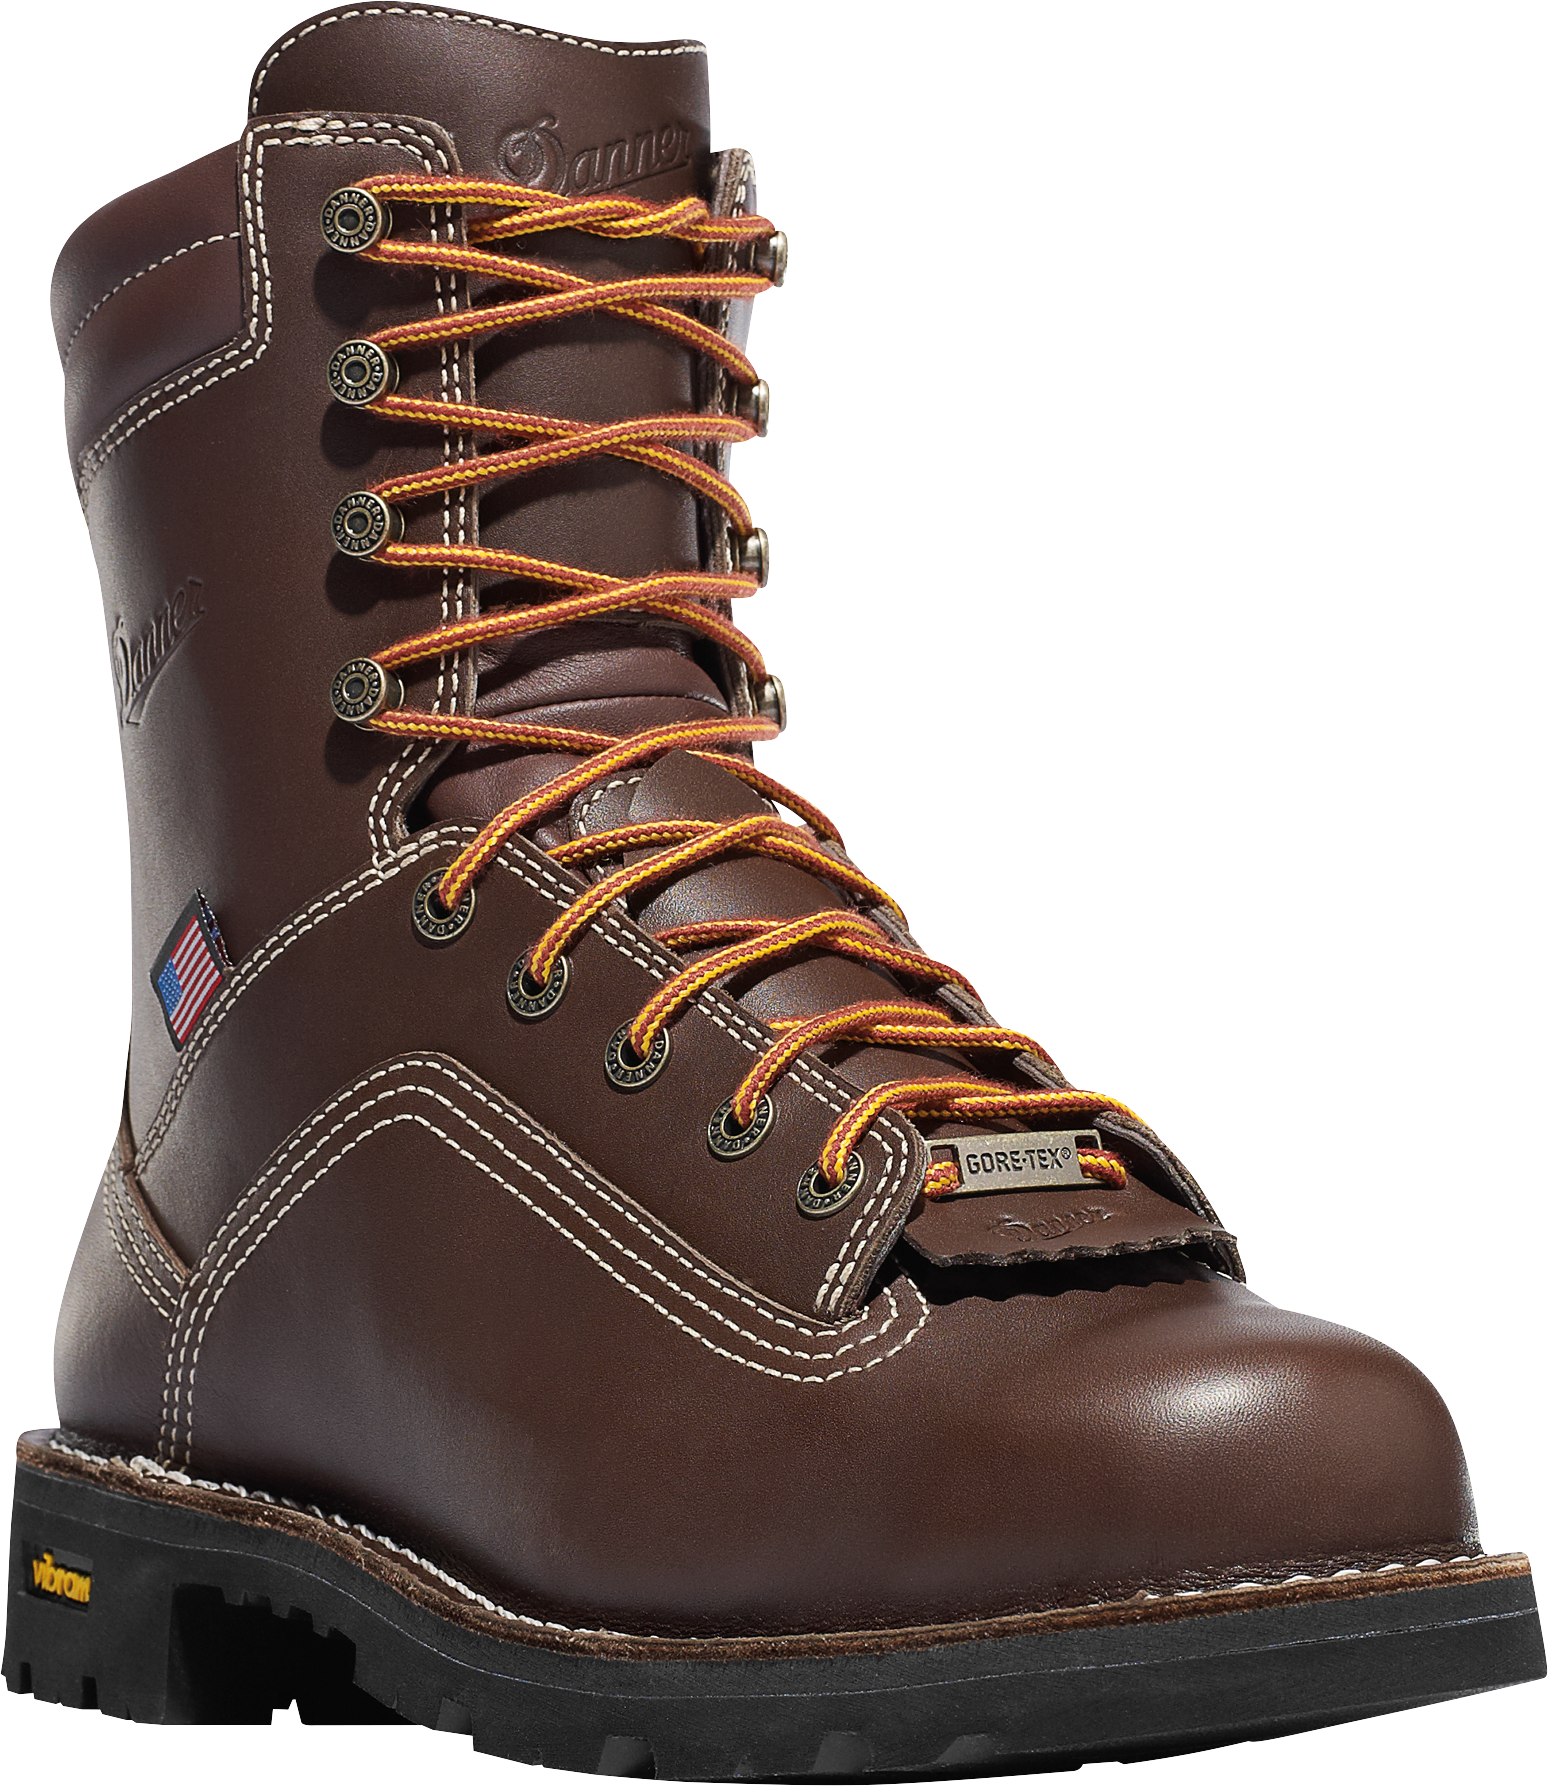 Danner Quarry USA Brown GORE-TEX Alloy Toe Work Boots for Men - Brown - 10.5M